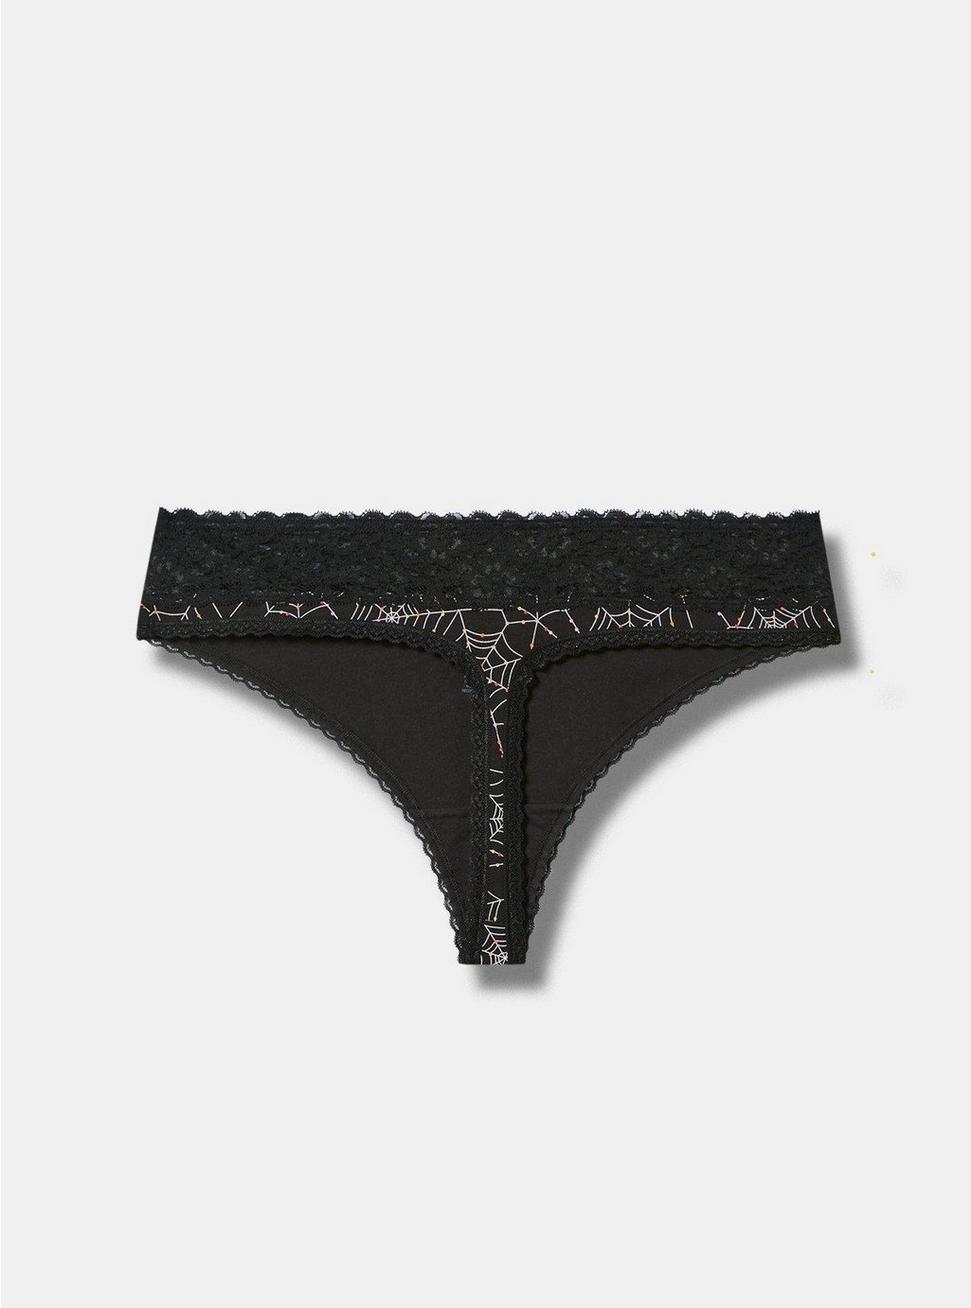 Plus Size Cotton Mid-Rise Thong Lace Trim Panty, ALLOVER SPIDERWEBS BLACK, alternate